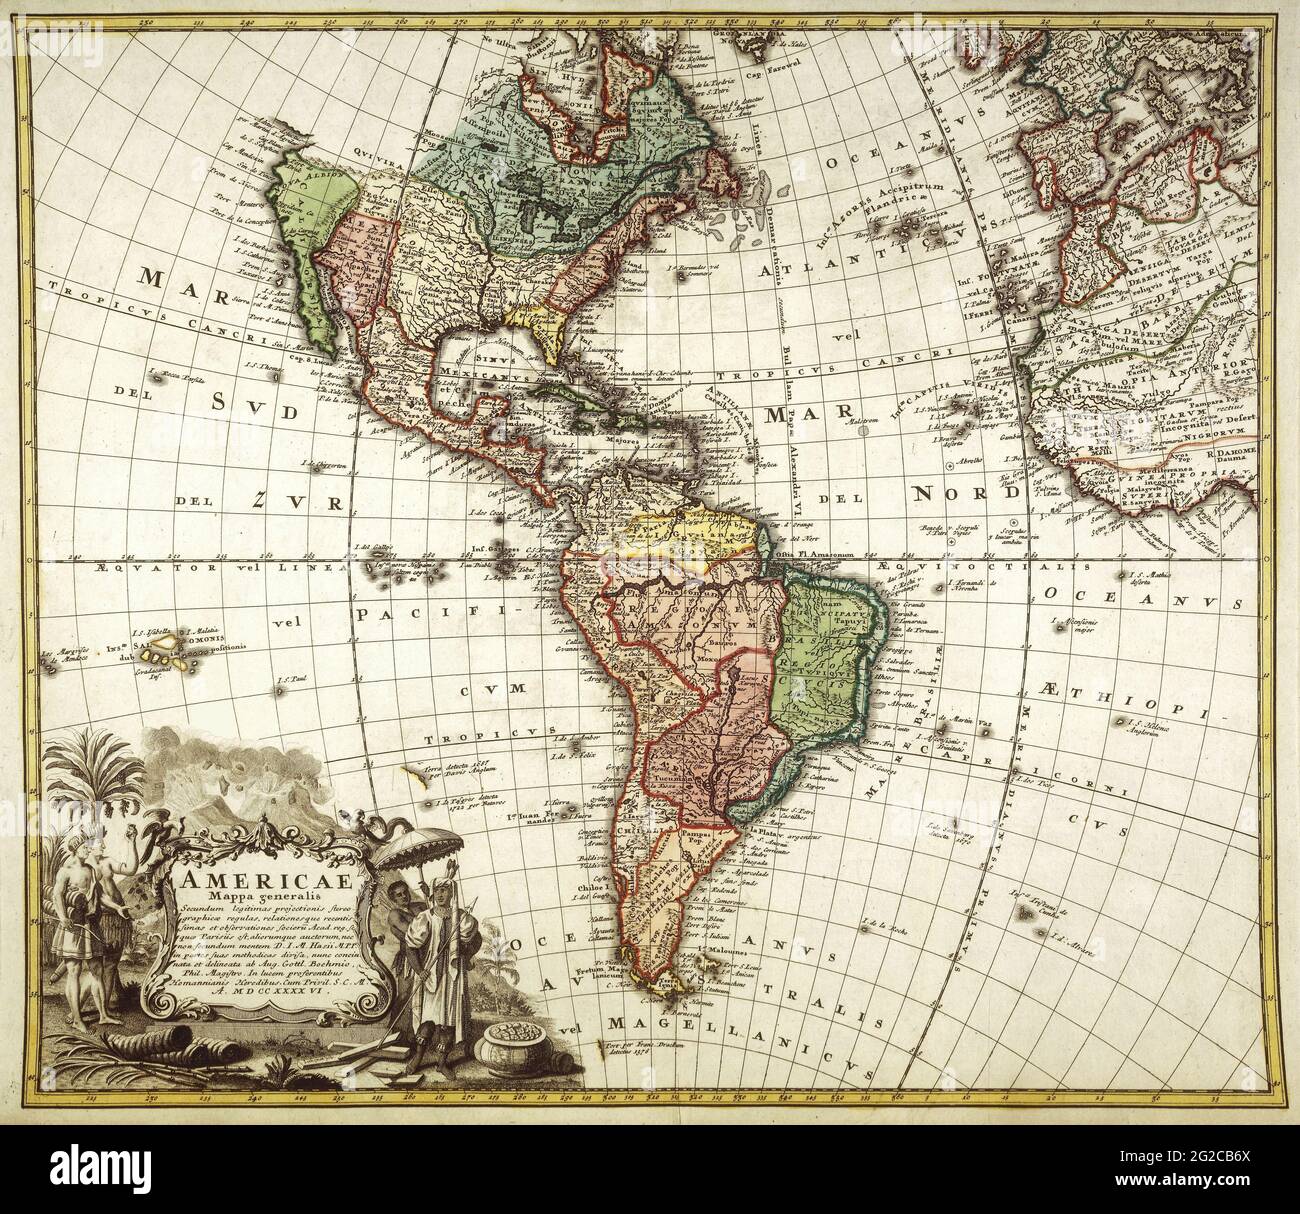 The Americas Map, Map of The Americas, Old Americas Map, Retro Map of The  Americas, Vintage Map of the Americas, America Map, Map of America, 1730 Map  Stock Photo - Alamy